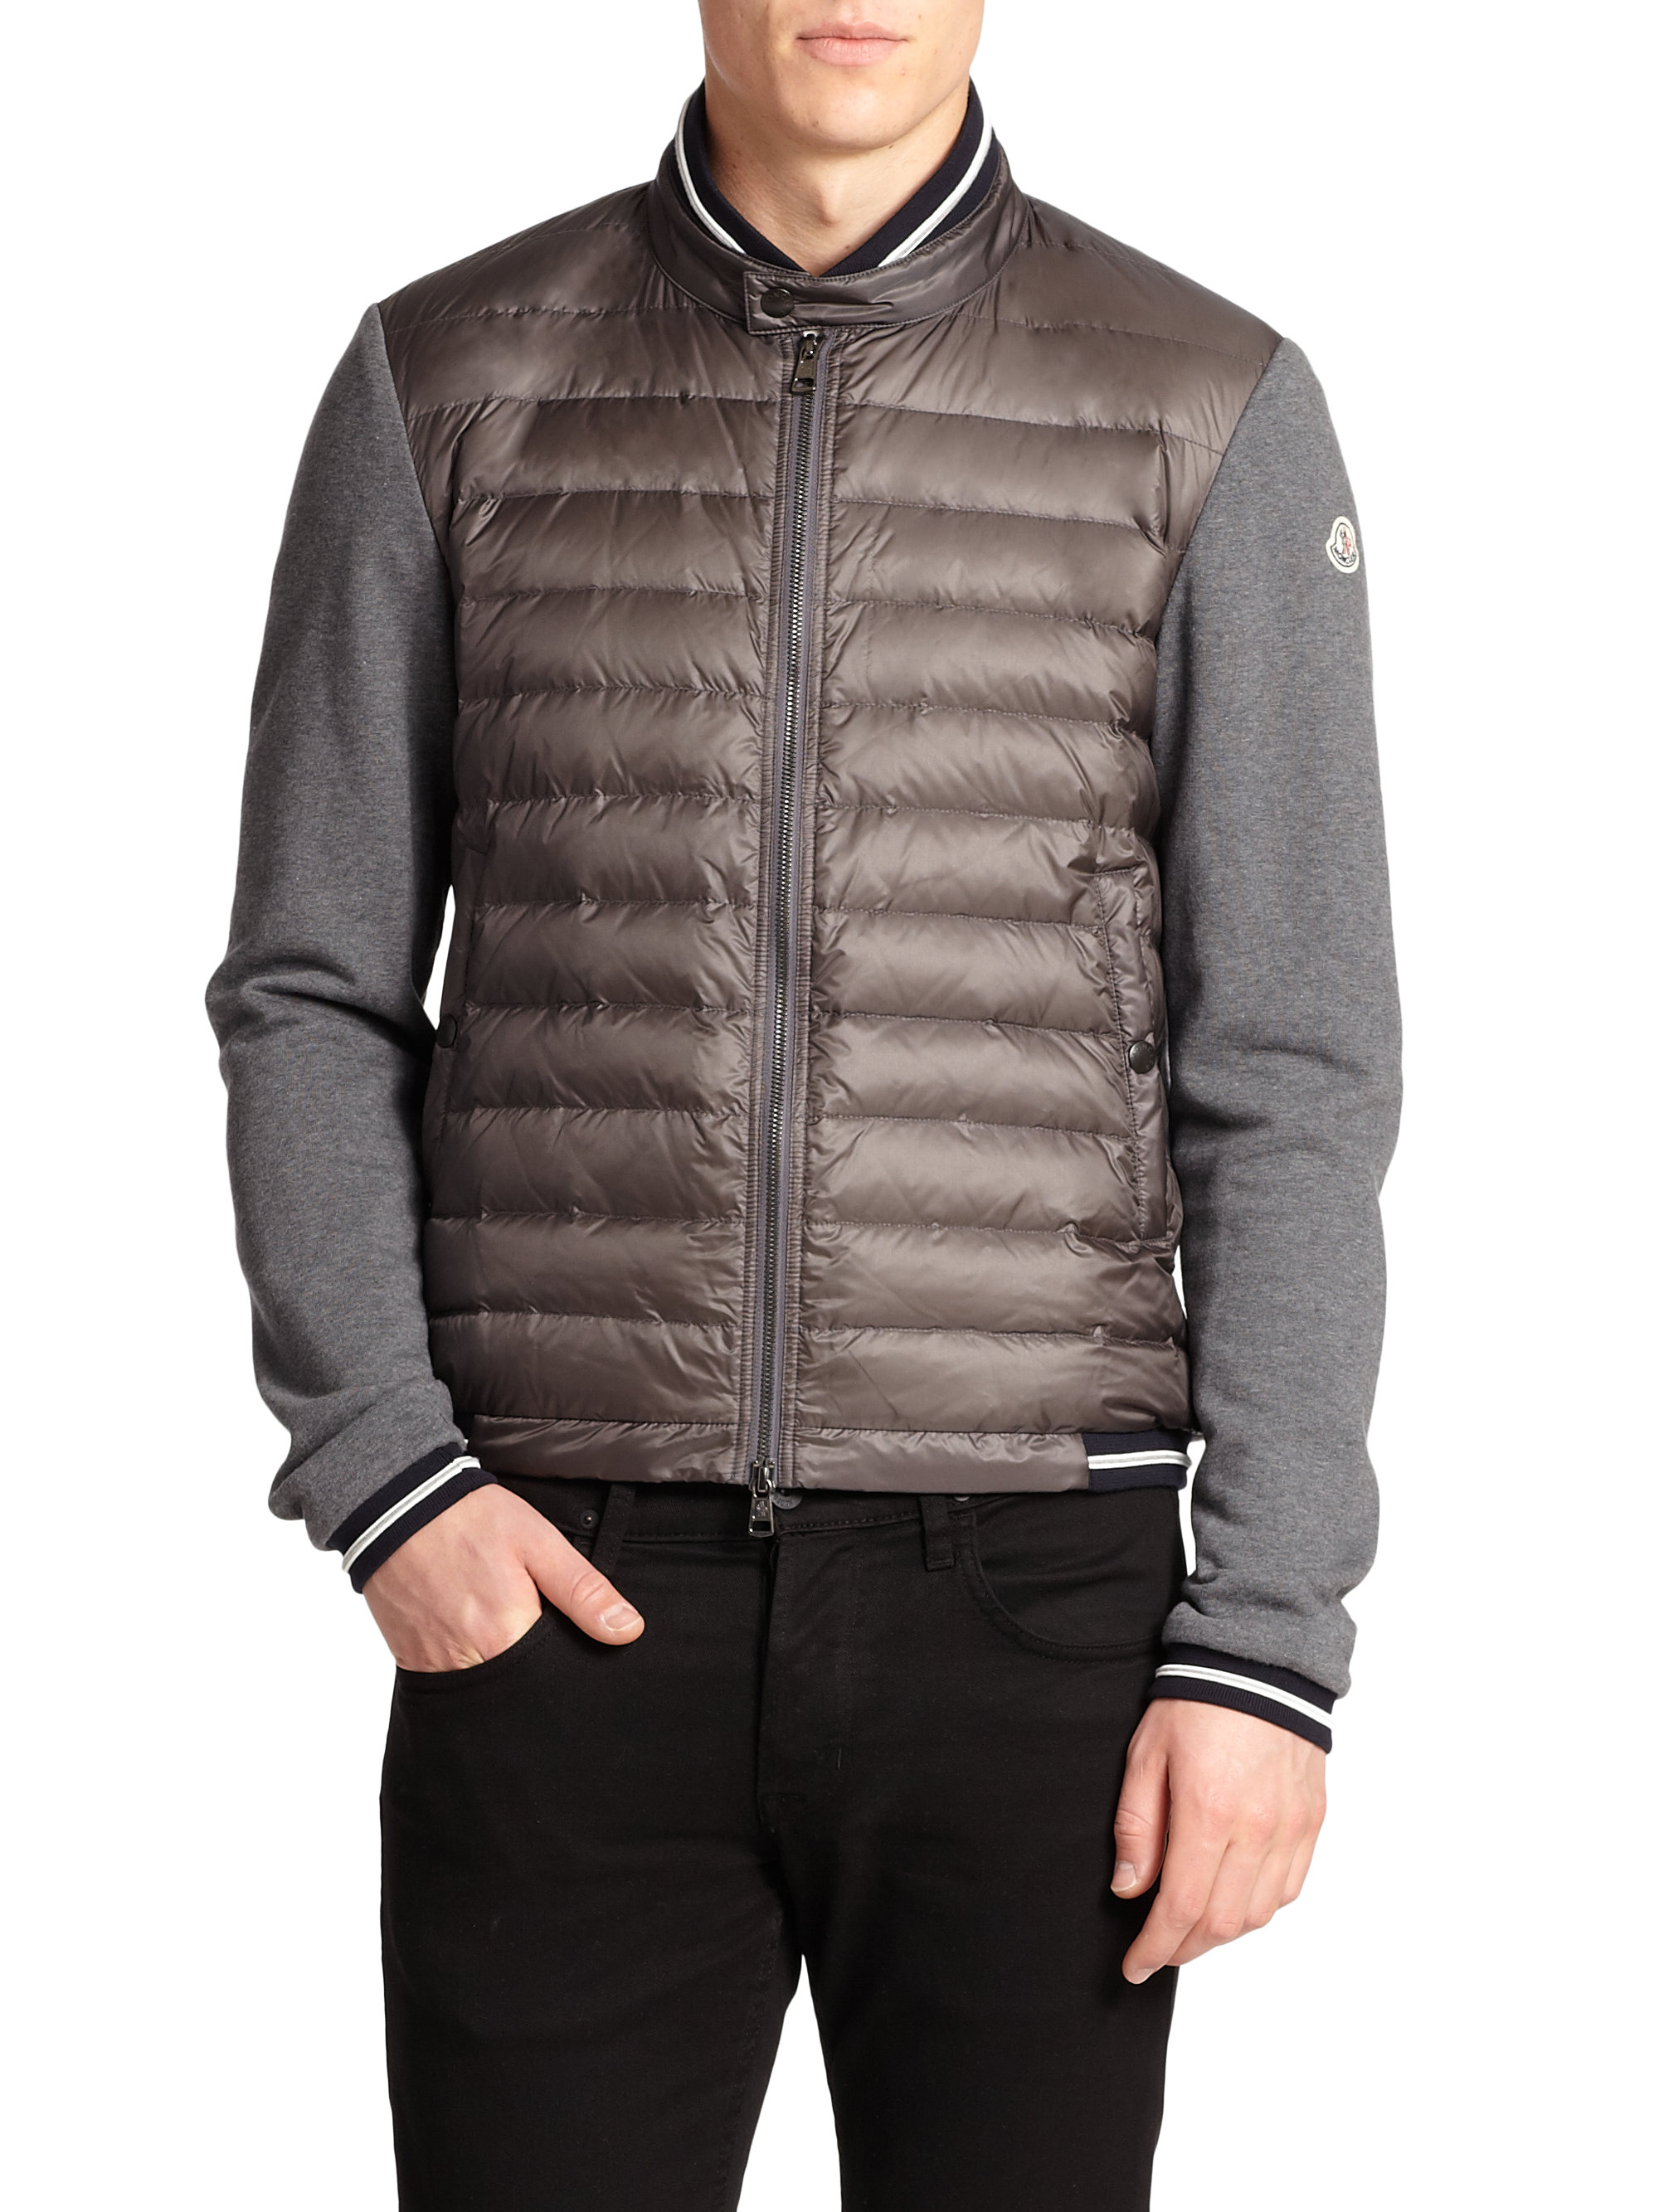 Moncler Cotton Down Puffer Cardigan Sweater in Grey (Gray) for Men - Lyst